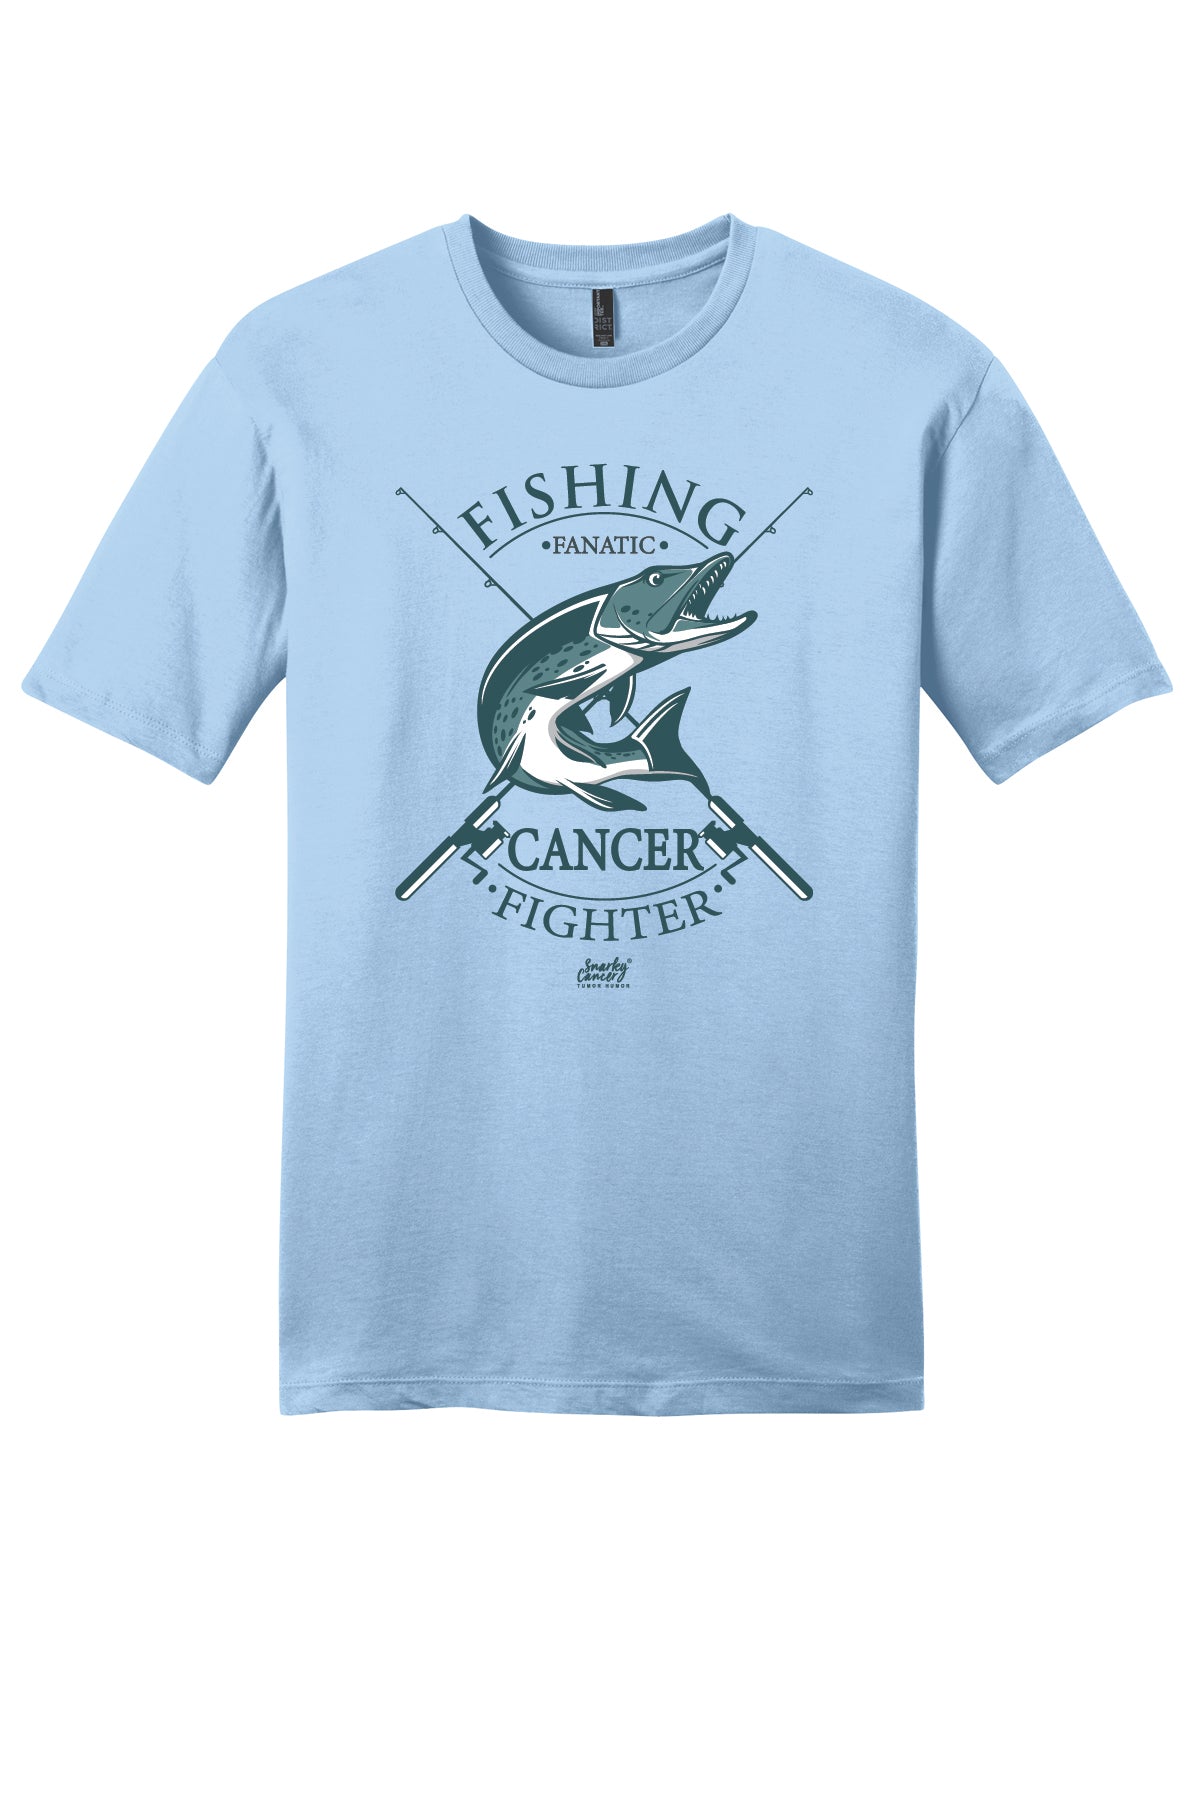 Fishing Fanatic Cancer Fighter